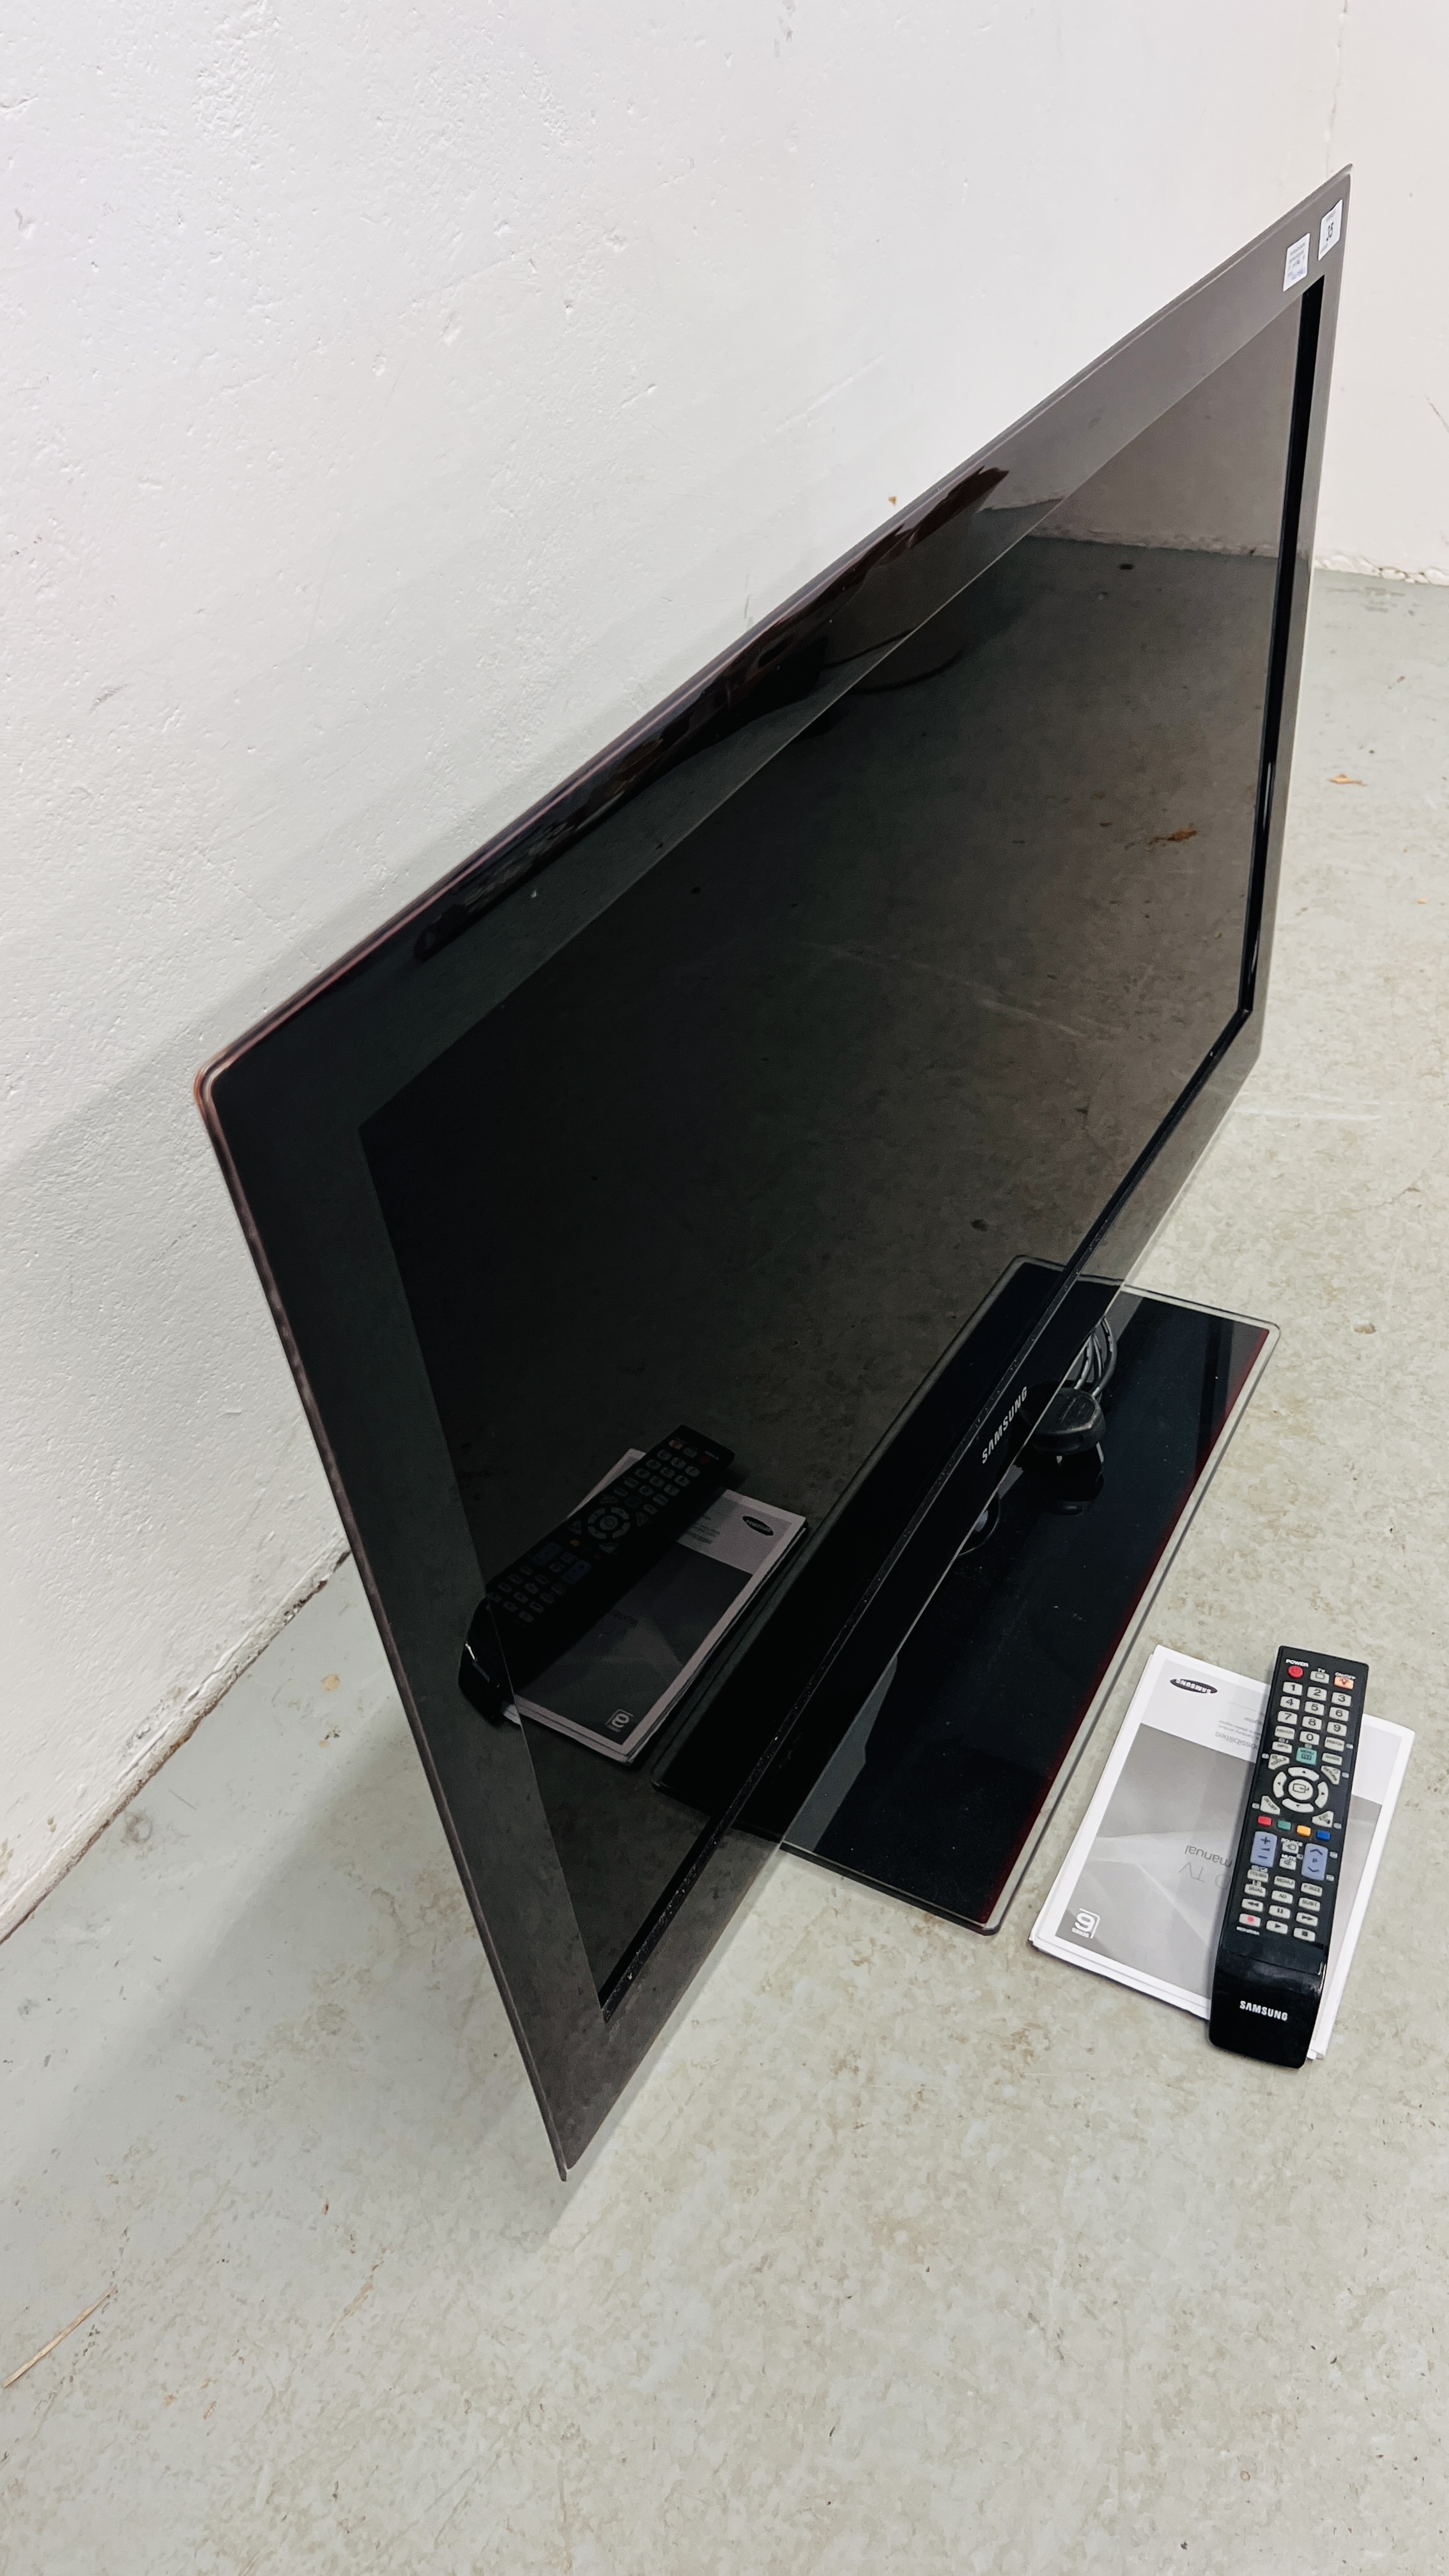 A SAMSUNG 40 INCH FLAT SCREEN TELEVISION COMPLETE WITH REMOTE AND MANUAL - SOLD AS SEEN - Image 2 of 4